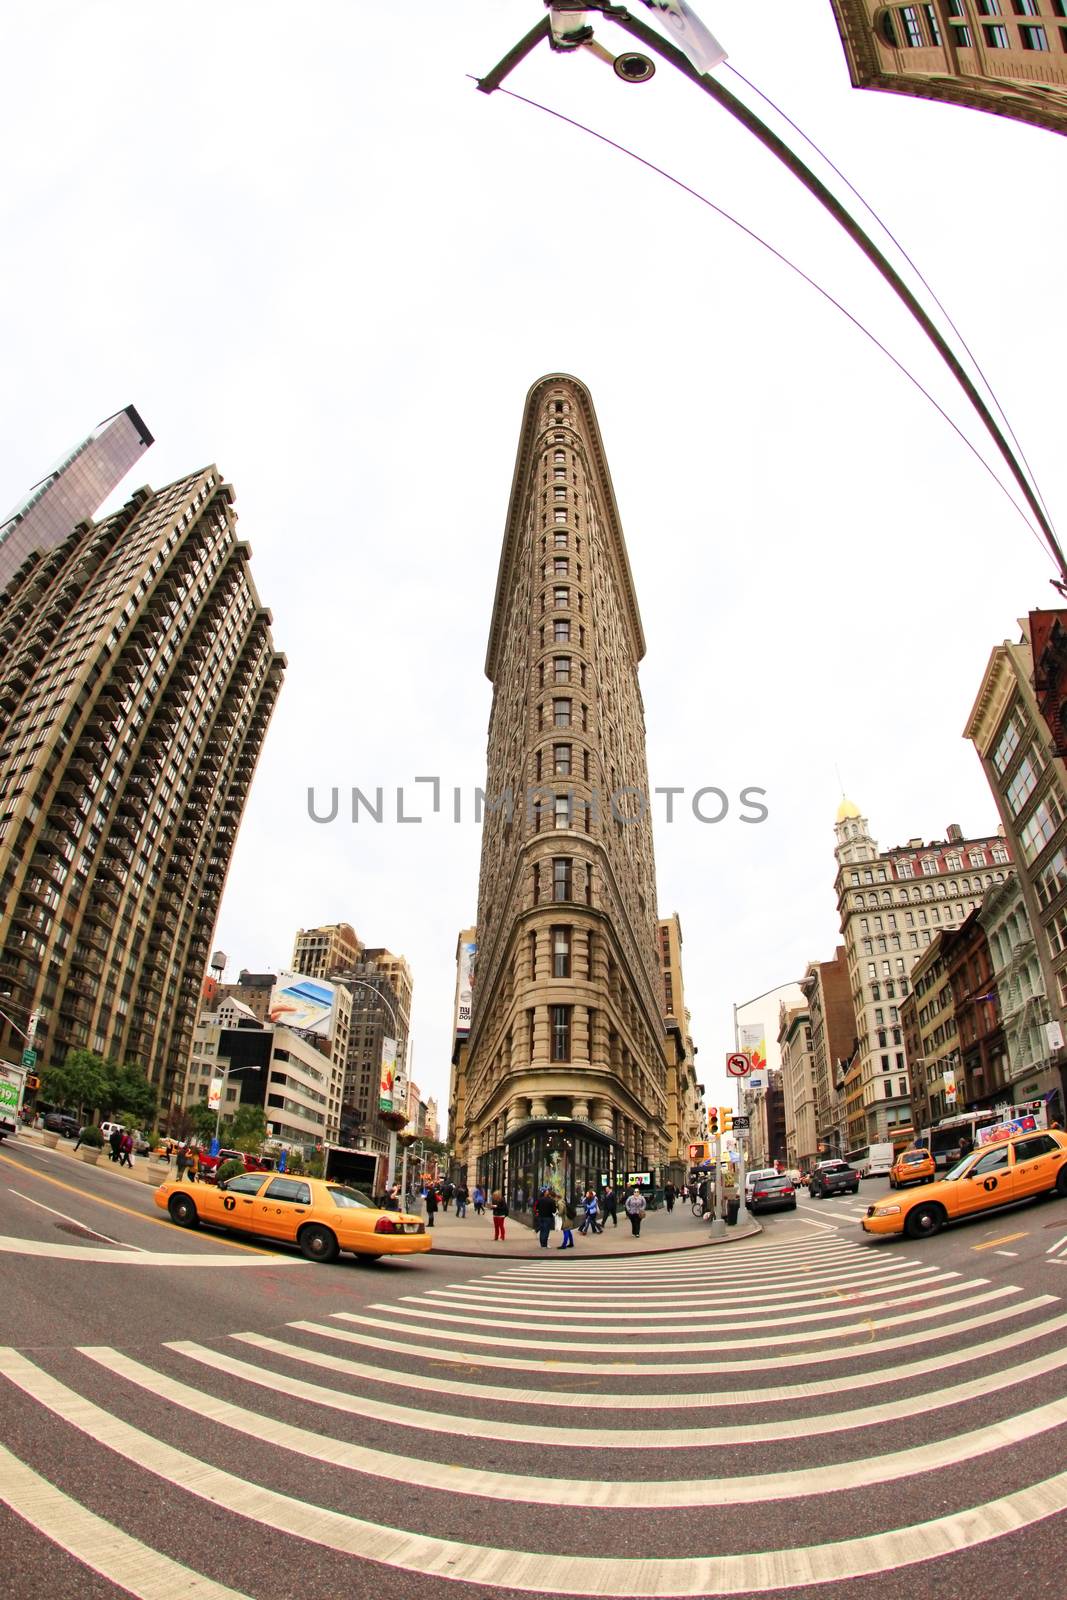 Flat Iron building by friday